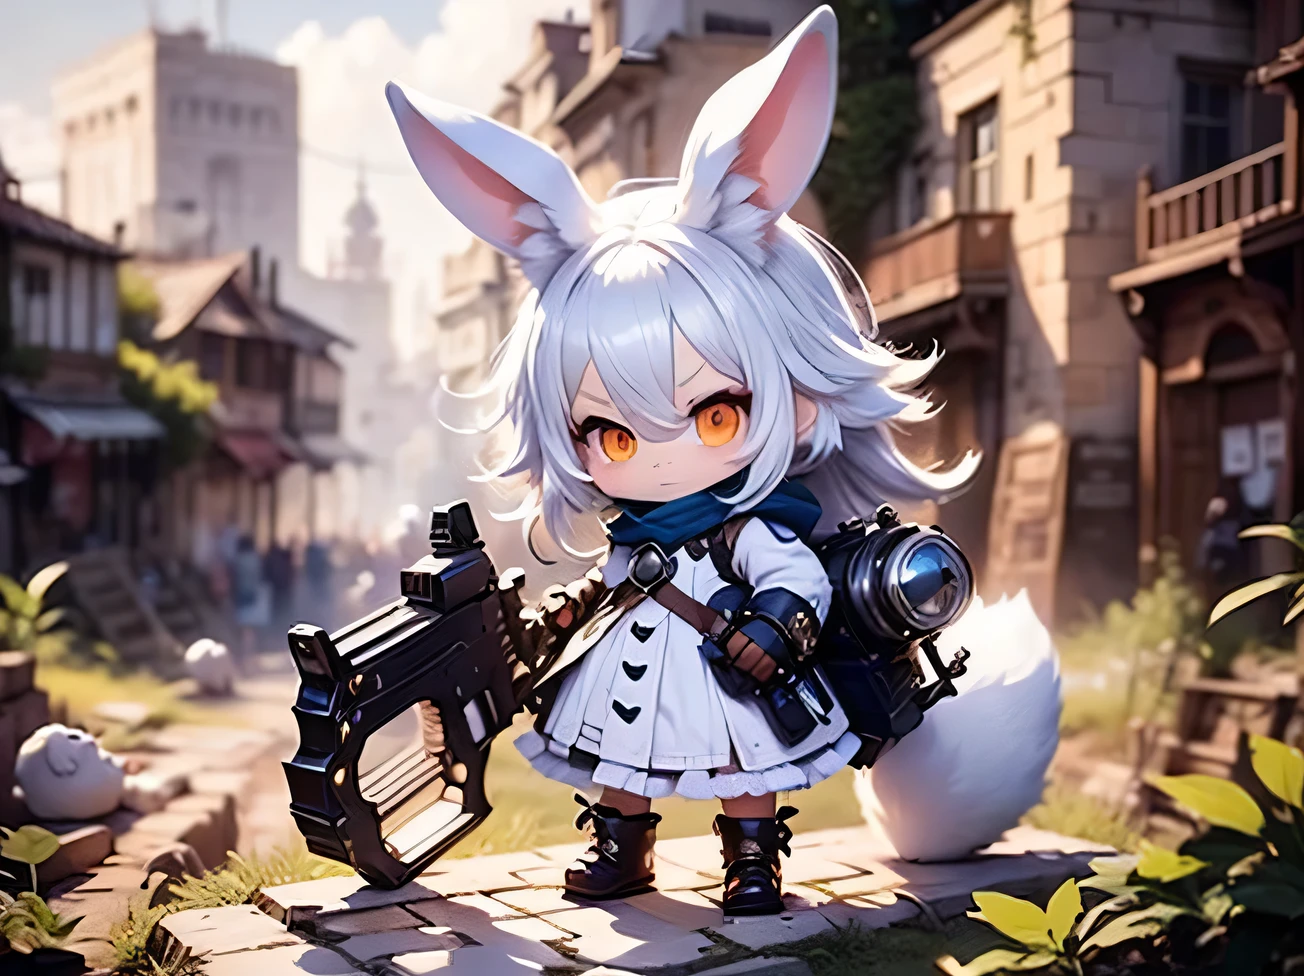 quality\(8k,wallpaper of extremely detailed CG unit, ​masterpiece,hight resolution,top-quality,top-quality real texture skin,hyper realisitic,increase the resolution,RAW photos,best qualtiy,highly detailed,the wallpaper,golden ratio\), BREAK ,solo,1female\((chibi:1.8),cute,kawaii,small kid,(white hair:1.7),(very long hair:1.7),bangs,(ear\(fluffy white rabbit-ear\):1.3),(only 1small rabbit-tail at hip:1.2),(red eye),big eye,beautiful shiny eye,skin color white,big hairbow,(combat suit\(very tight,frilled,weapons\)),breast,shooting and aiming a laser gun to giant monster cat\), BREAK ,background\(city of Rubble,giant cats are destroying the city\),(close up female)